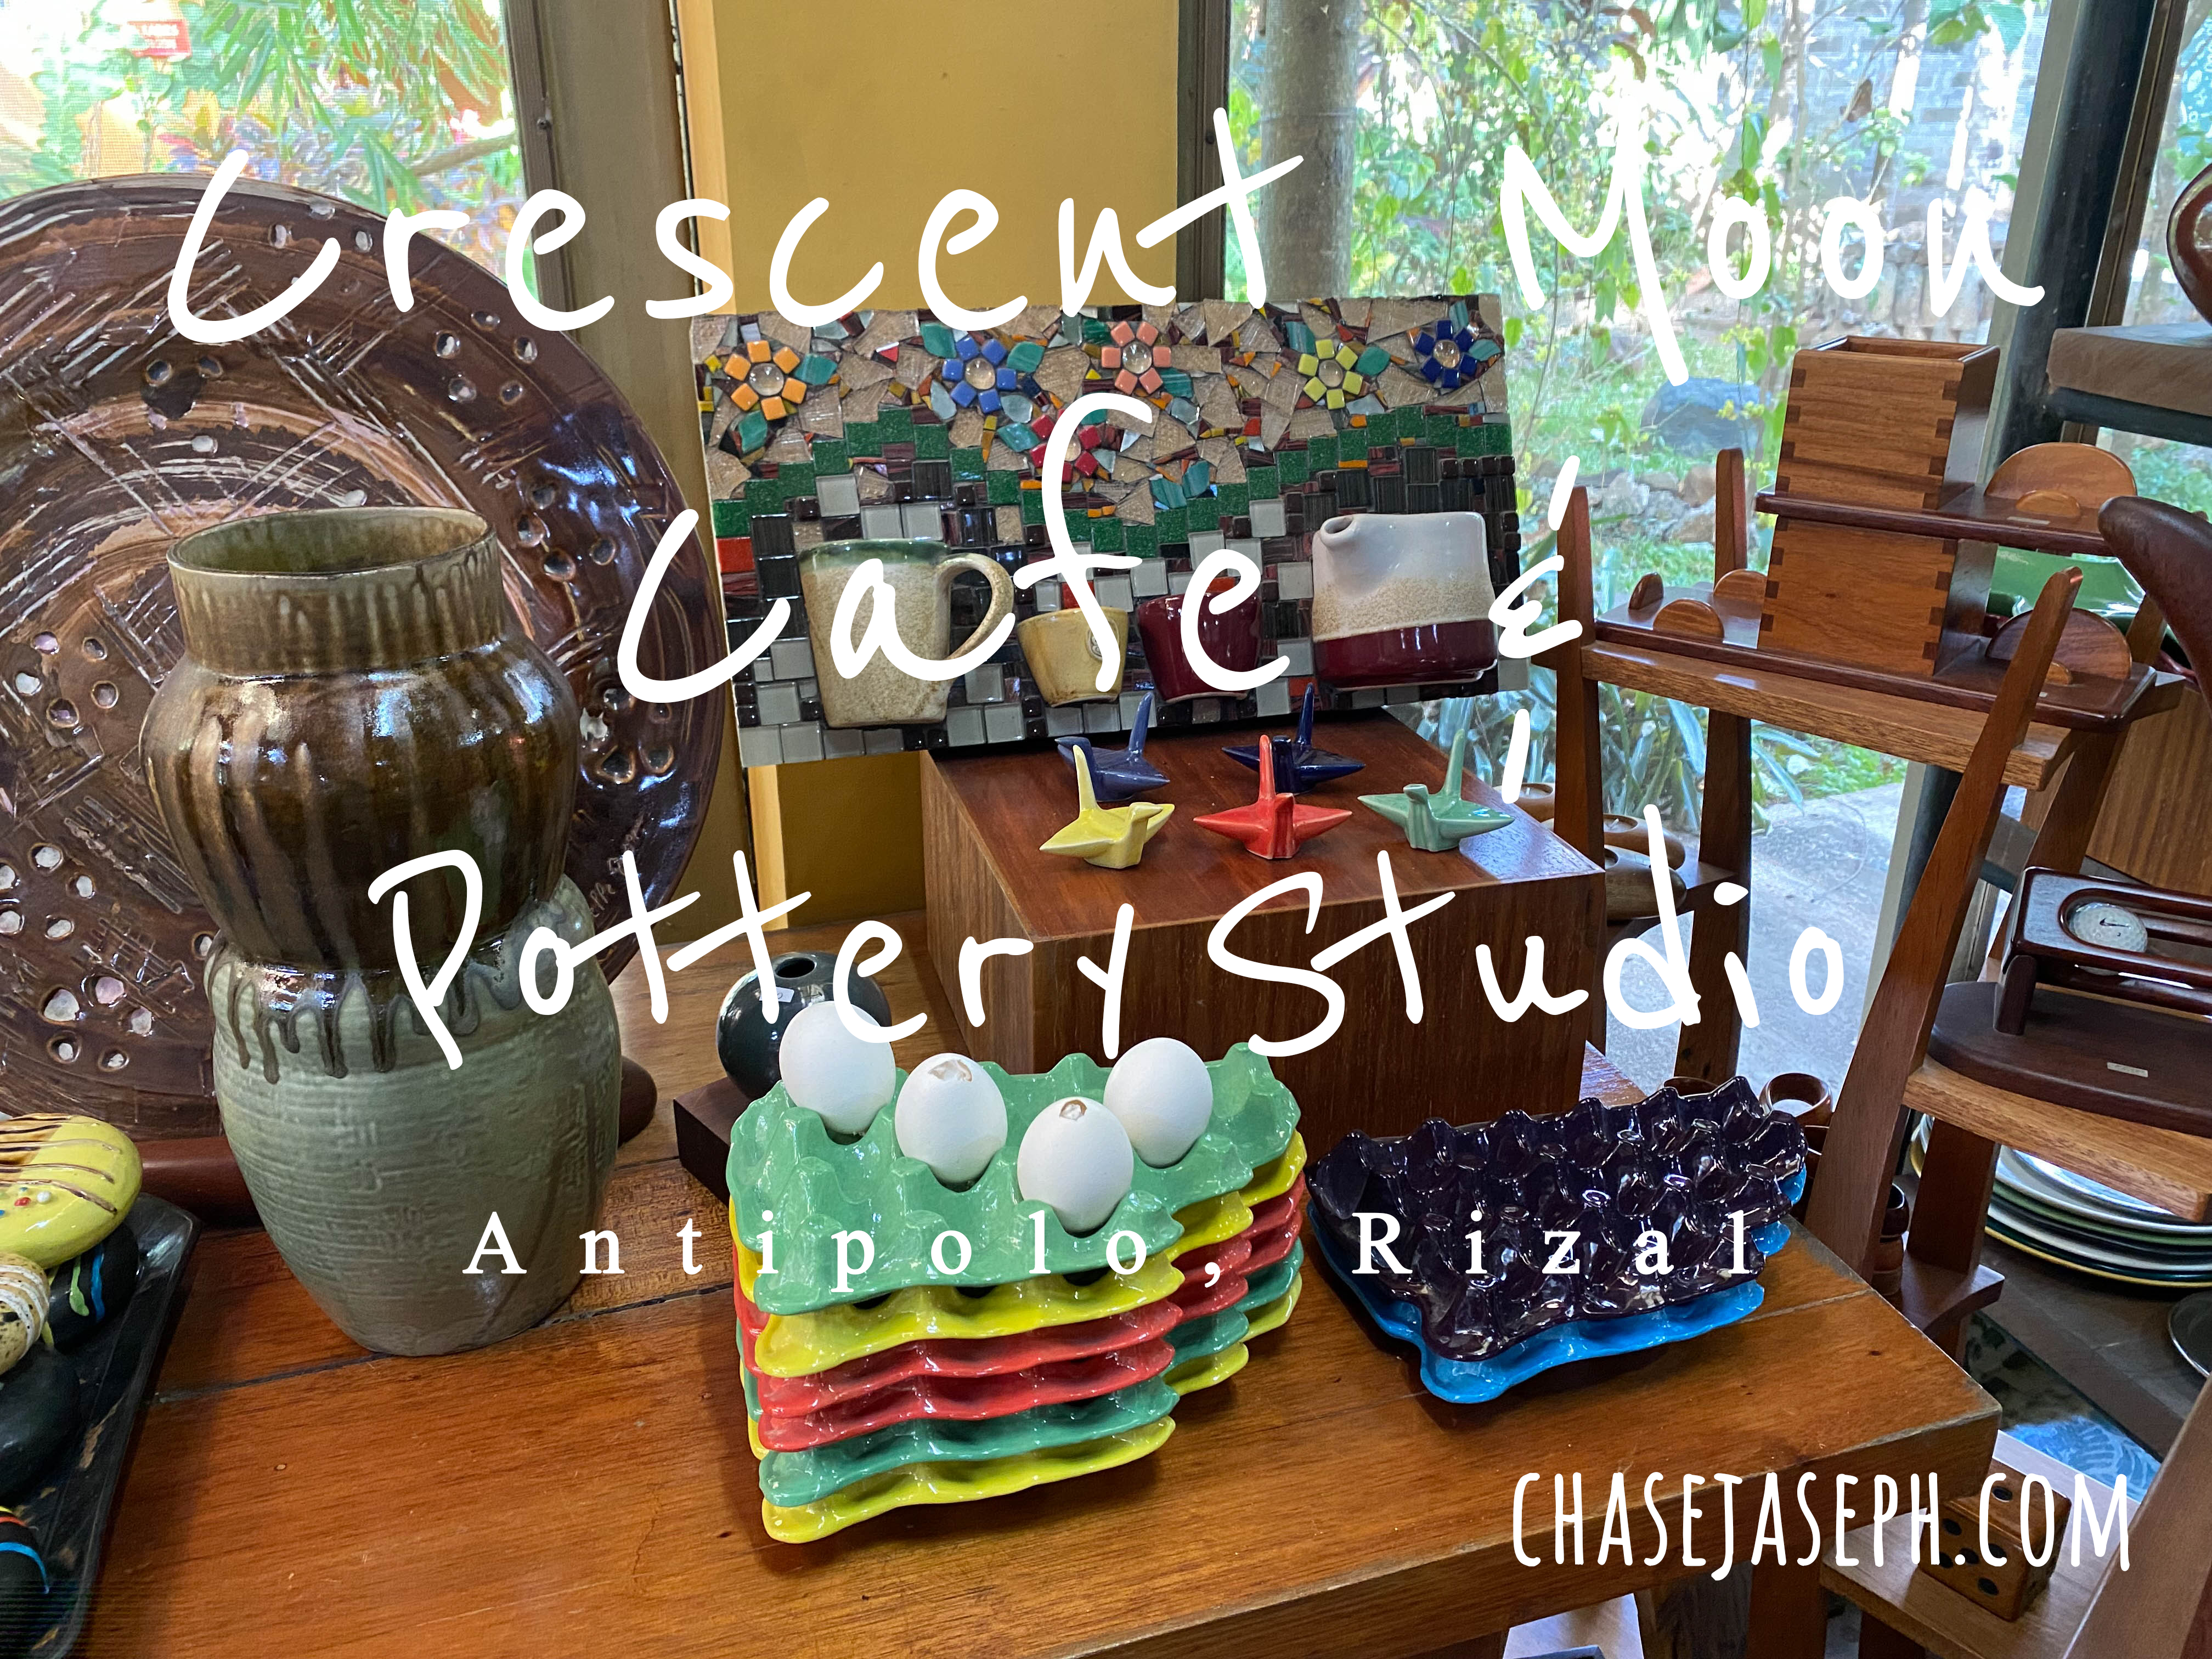 Crescent Moon Cafe and Studio Pottery - Antipolo Rizal (Food Guide)